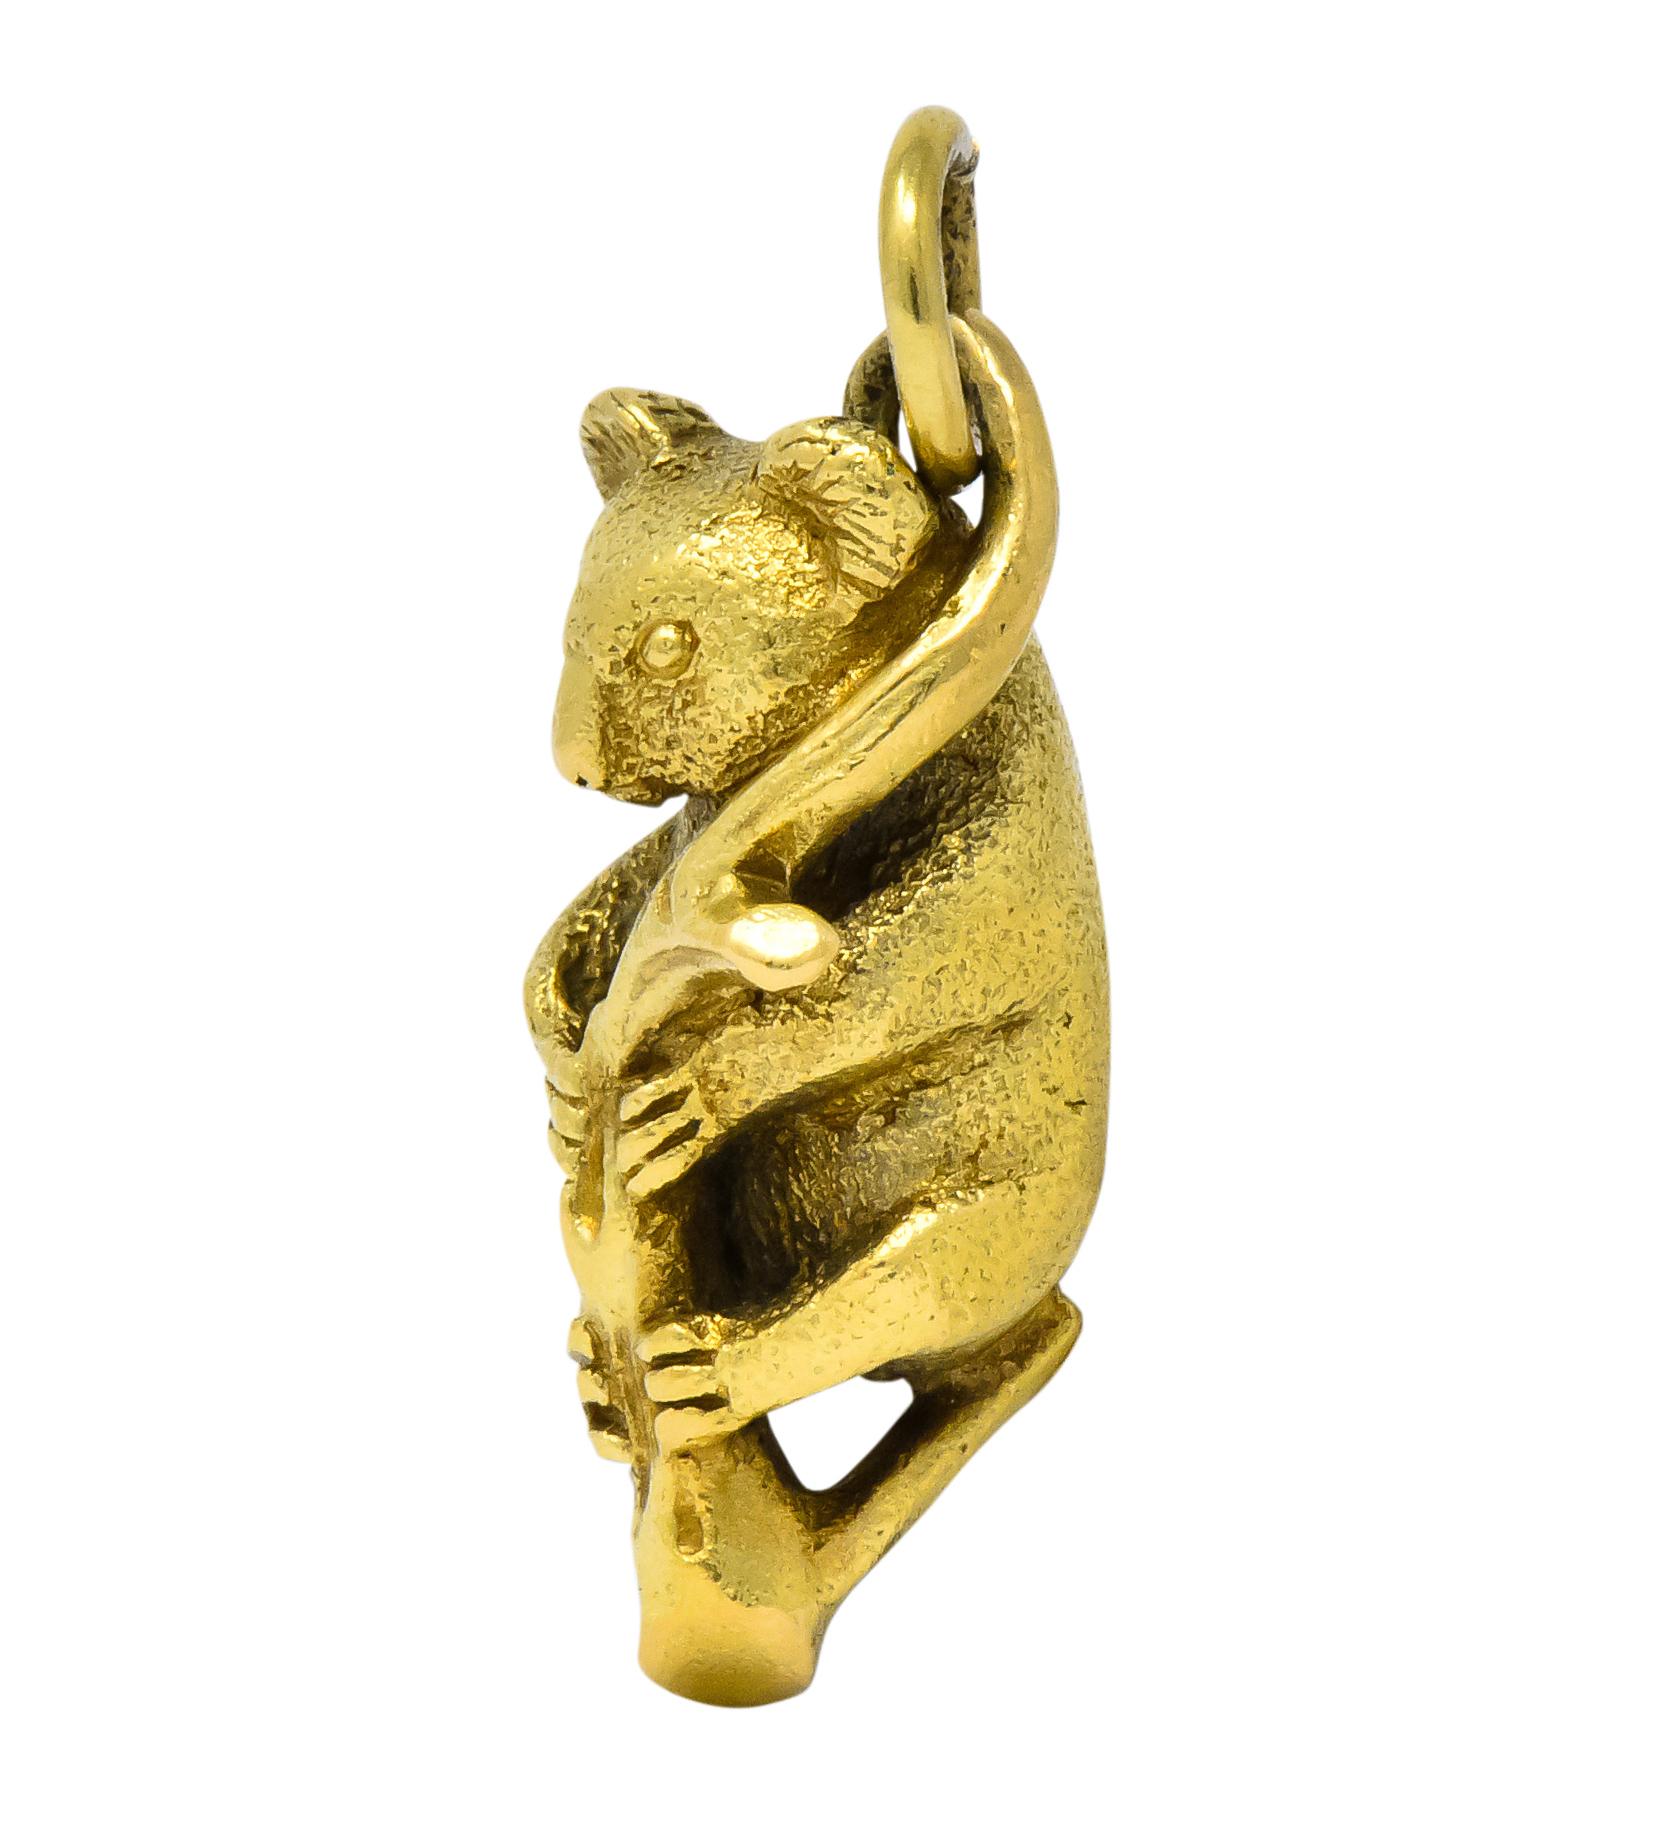 Designed as a koala bear clutching a branch

With textured and polished gold detail

Stamped 18ct, with maker's mark and stamped AS

Measures: 1 x 3/8 Inches

Total Weight: 13.4 Grams

Sweet. Fuzzy. Adorable.  
 

 


Stock Number: We-3276